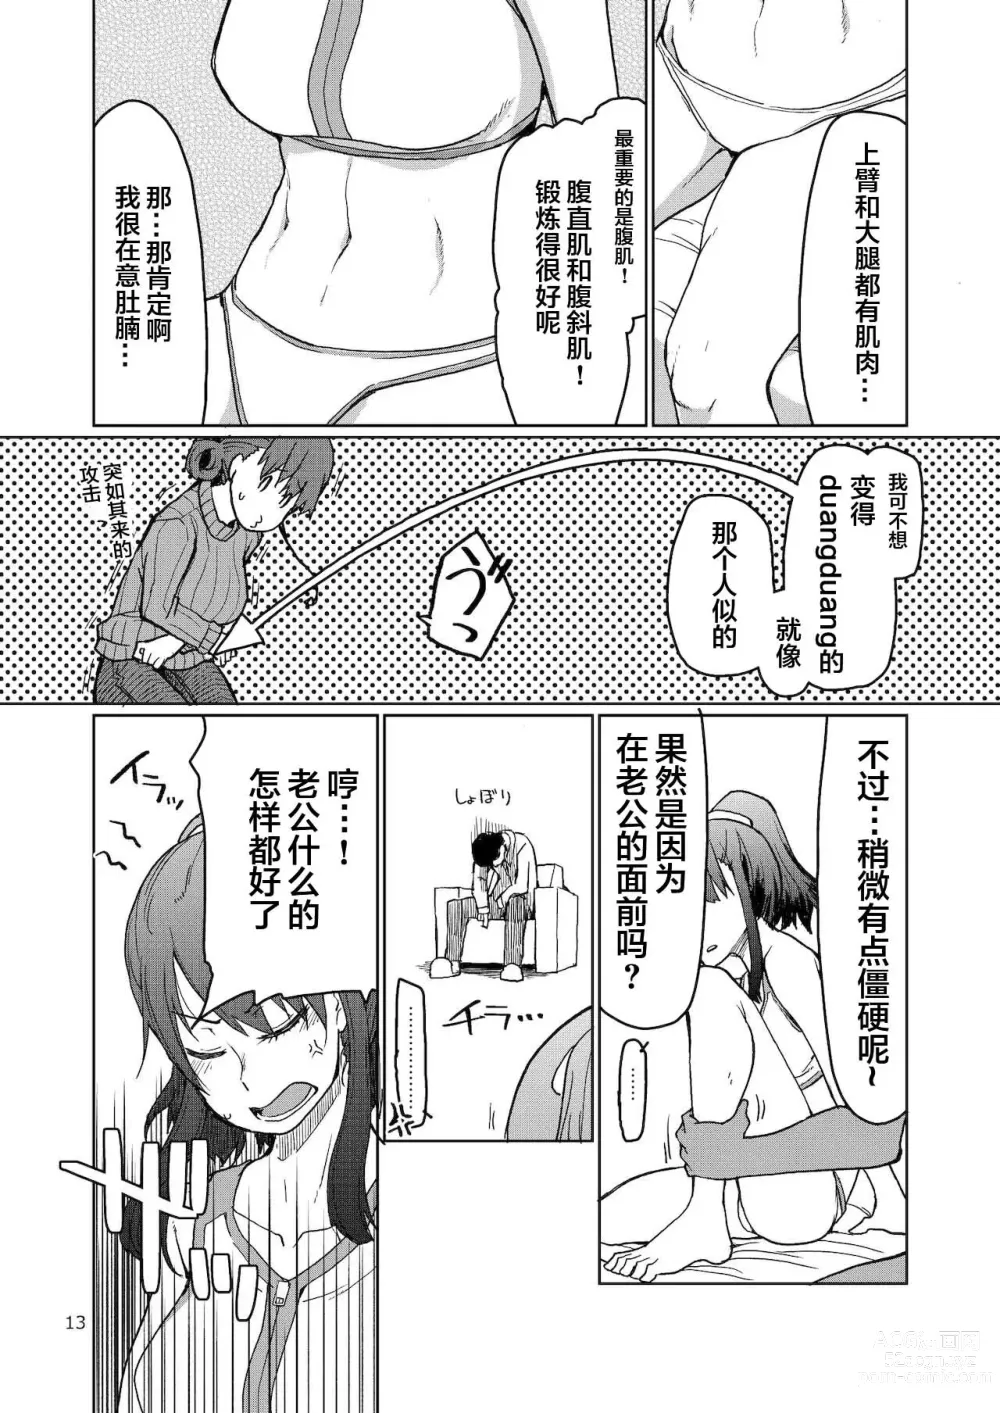 Page 14 of doujinshi SYG -Sell your girlfriend-2